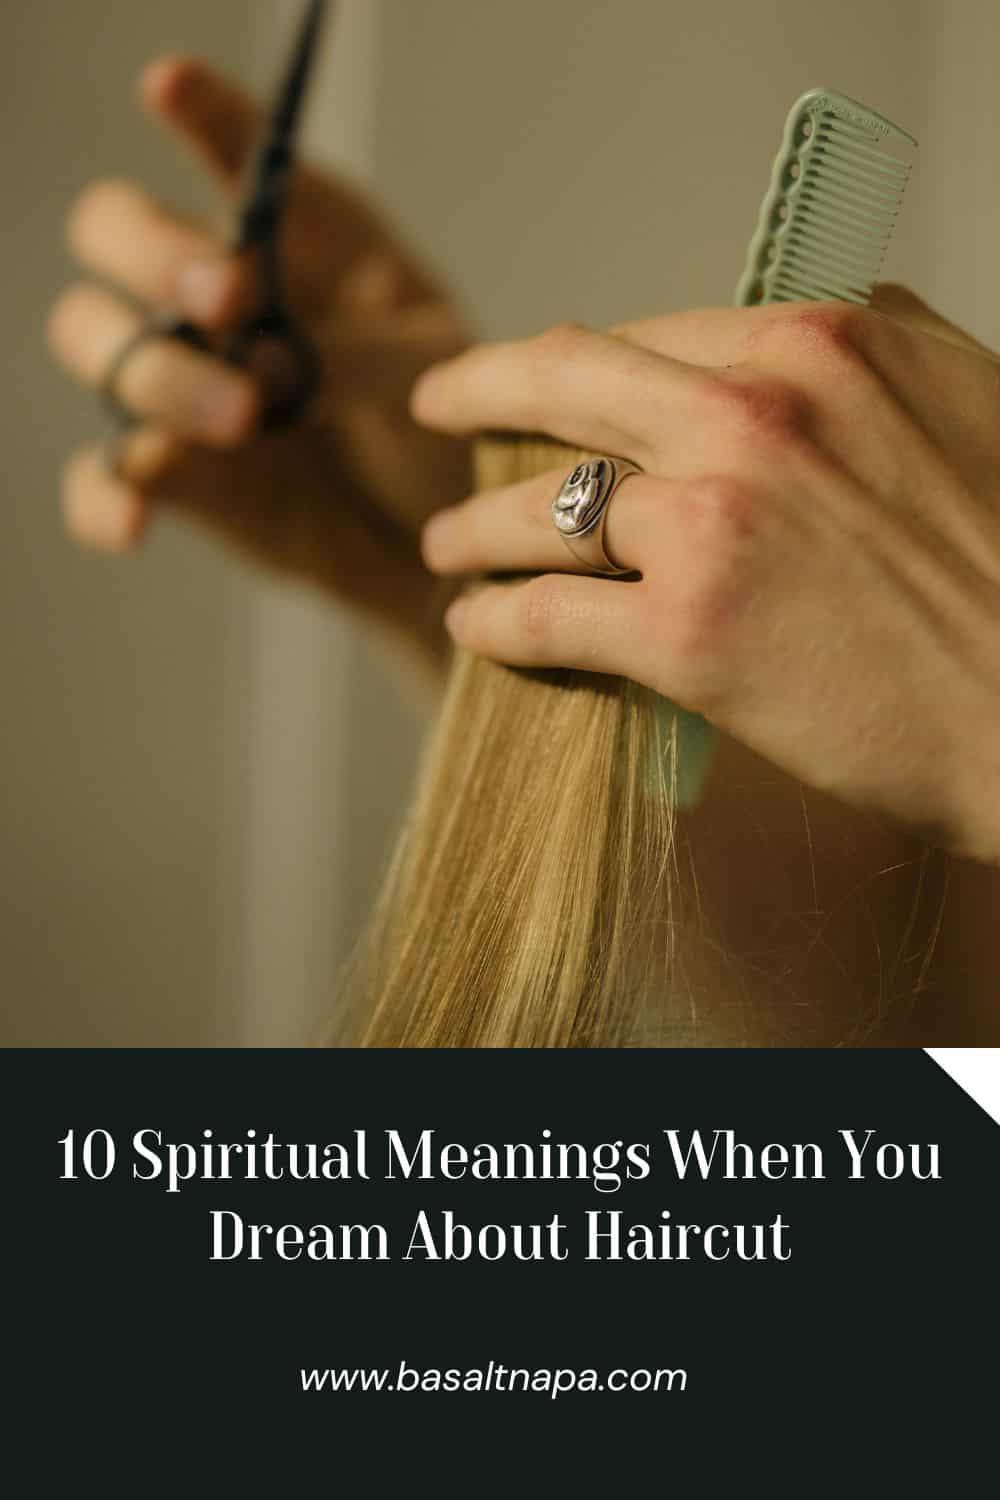 10 Spiritual Meanings When You Dream About Haircut